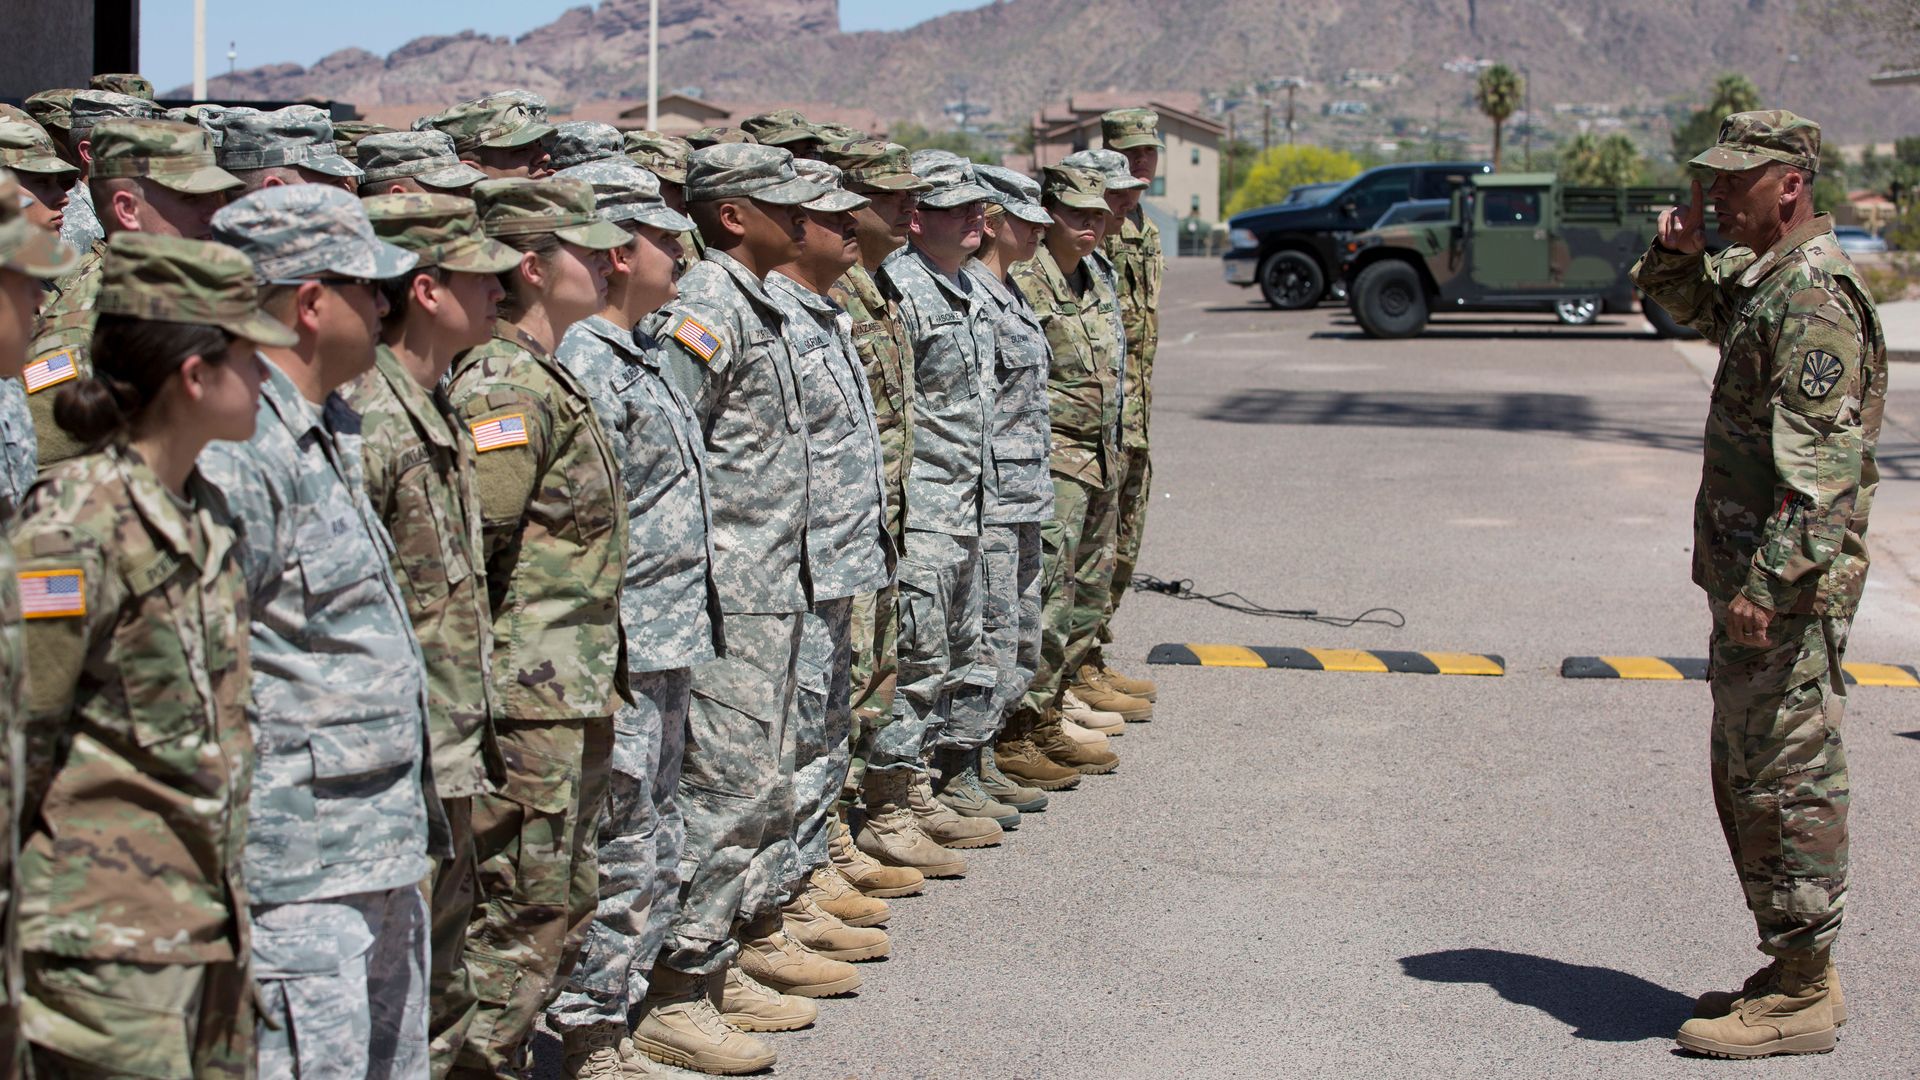 Members of the Arizona National Guard listen to instructions on April 9, 2018, at the Papago Park Military Reservation in Phoenix.